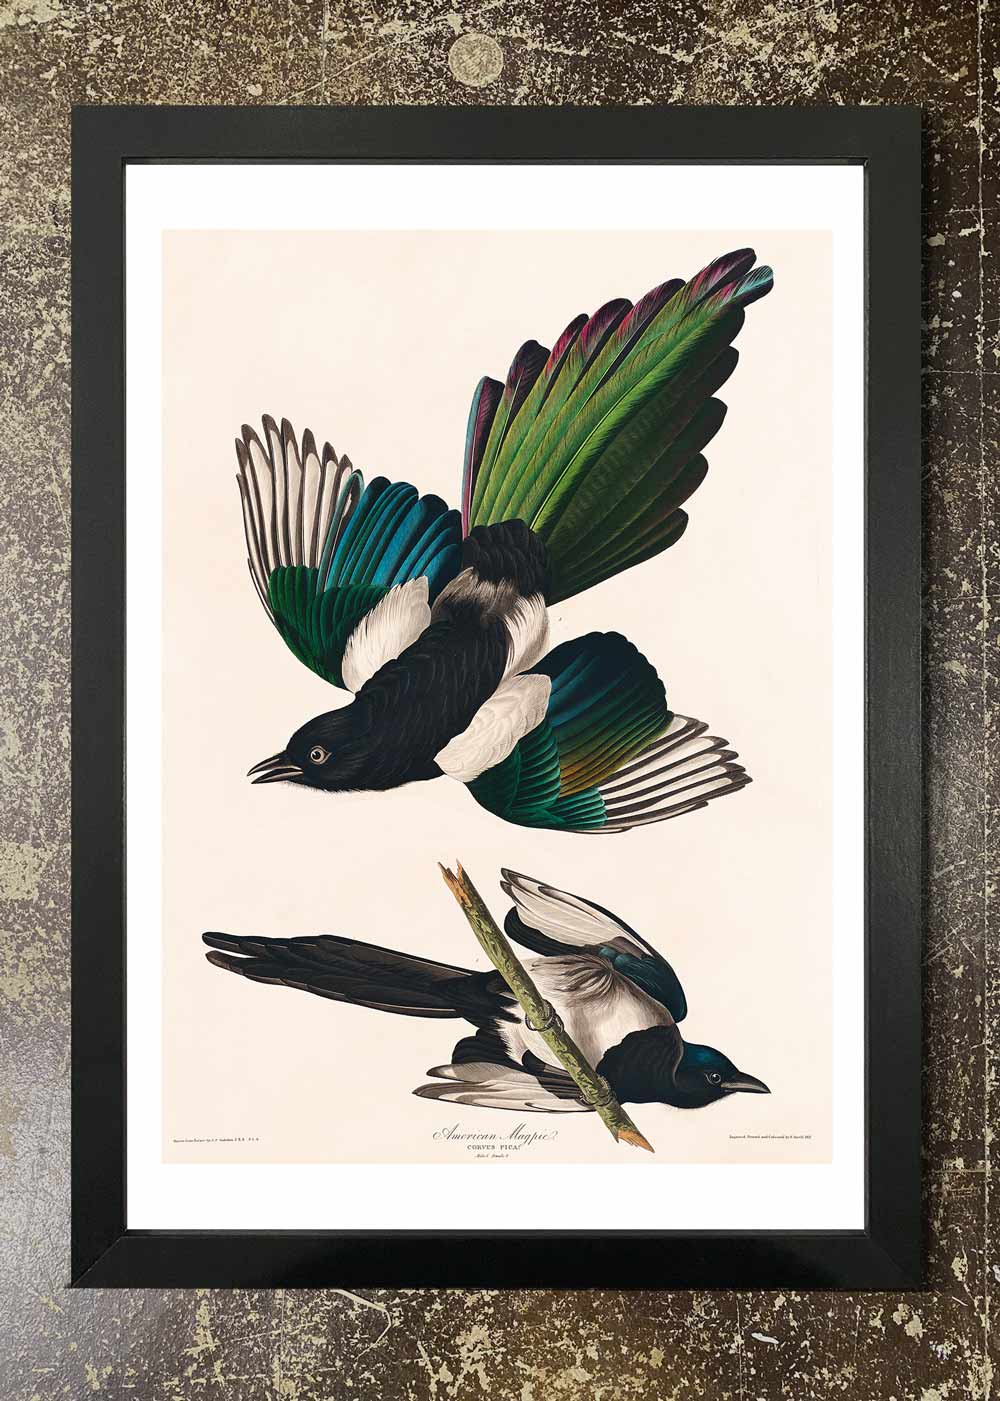 Magpies - Framed 21x30cm Print